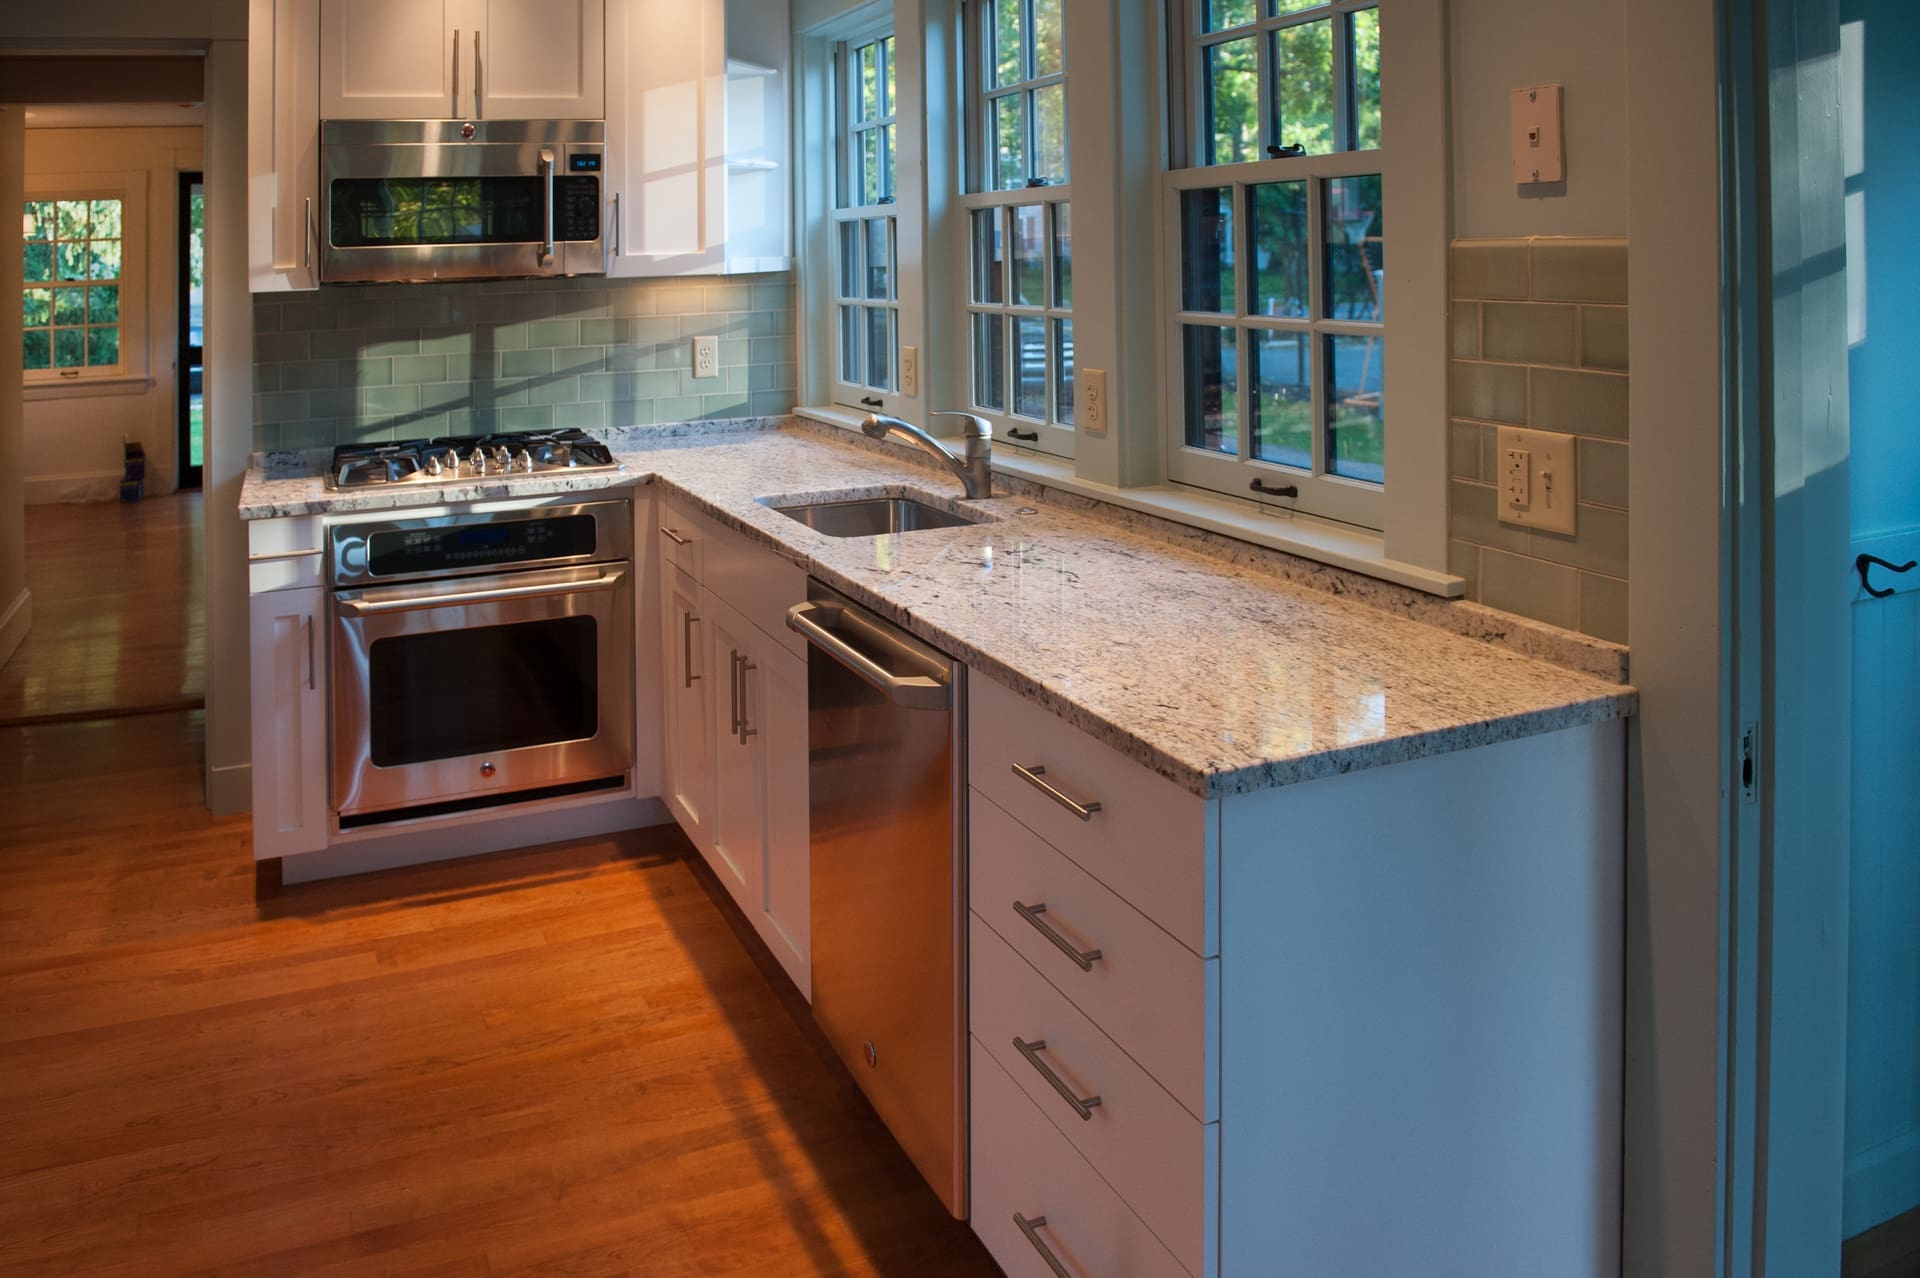 A photo of a kitchenette with white cabinets, stainless steel appliances, grey stone countertops, and a bank of colonial-style windows.